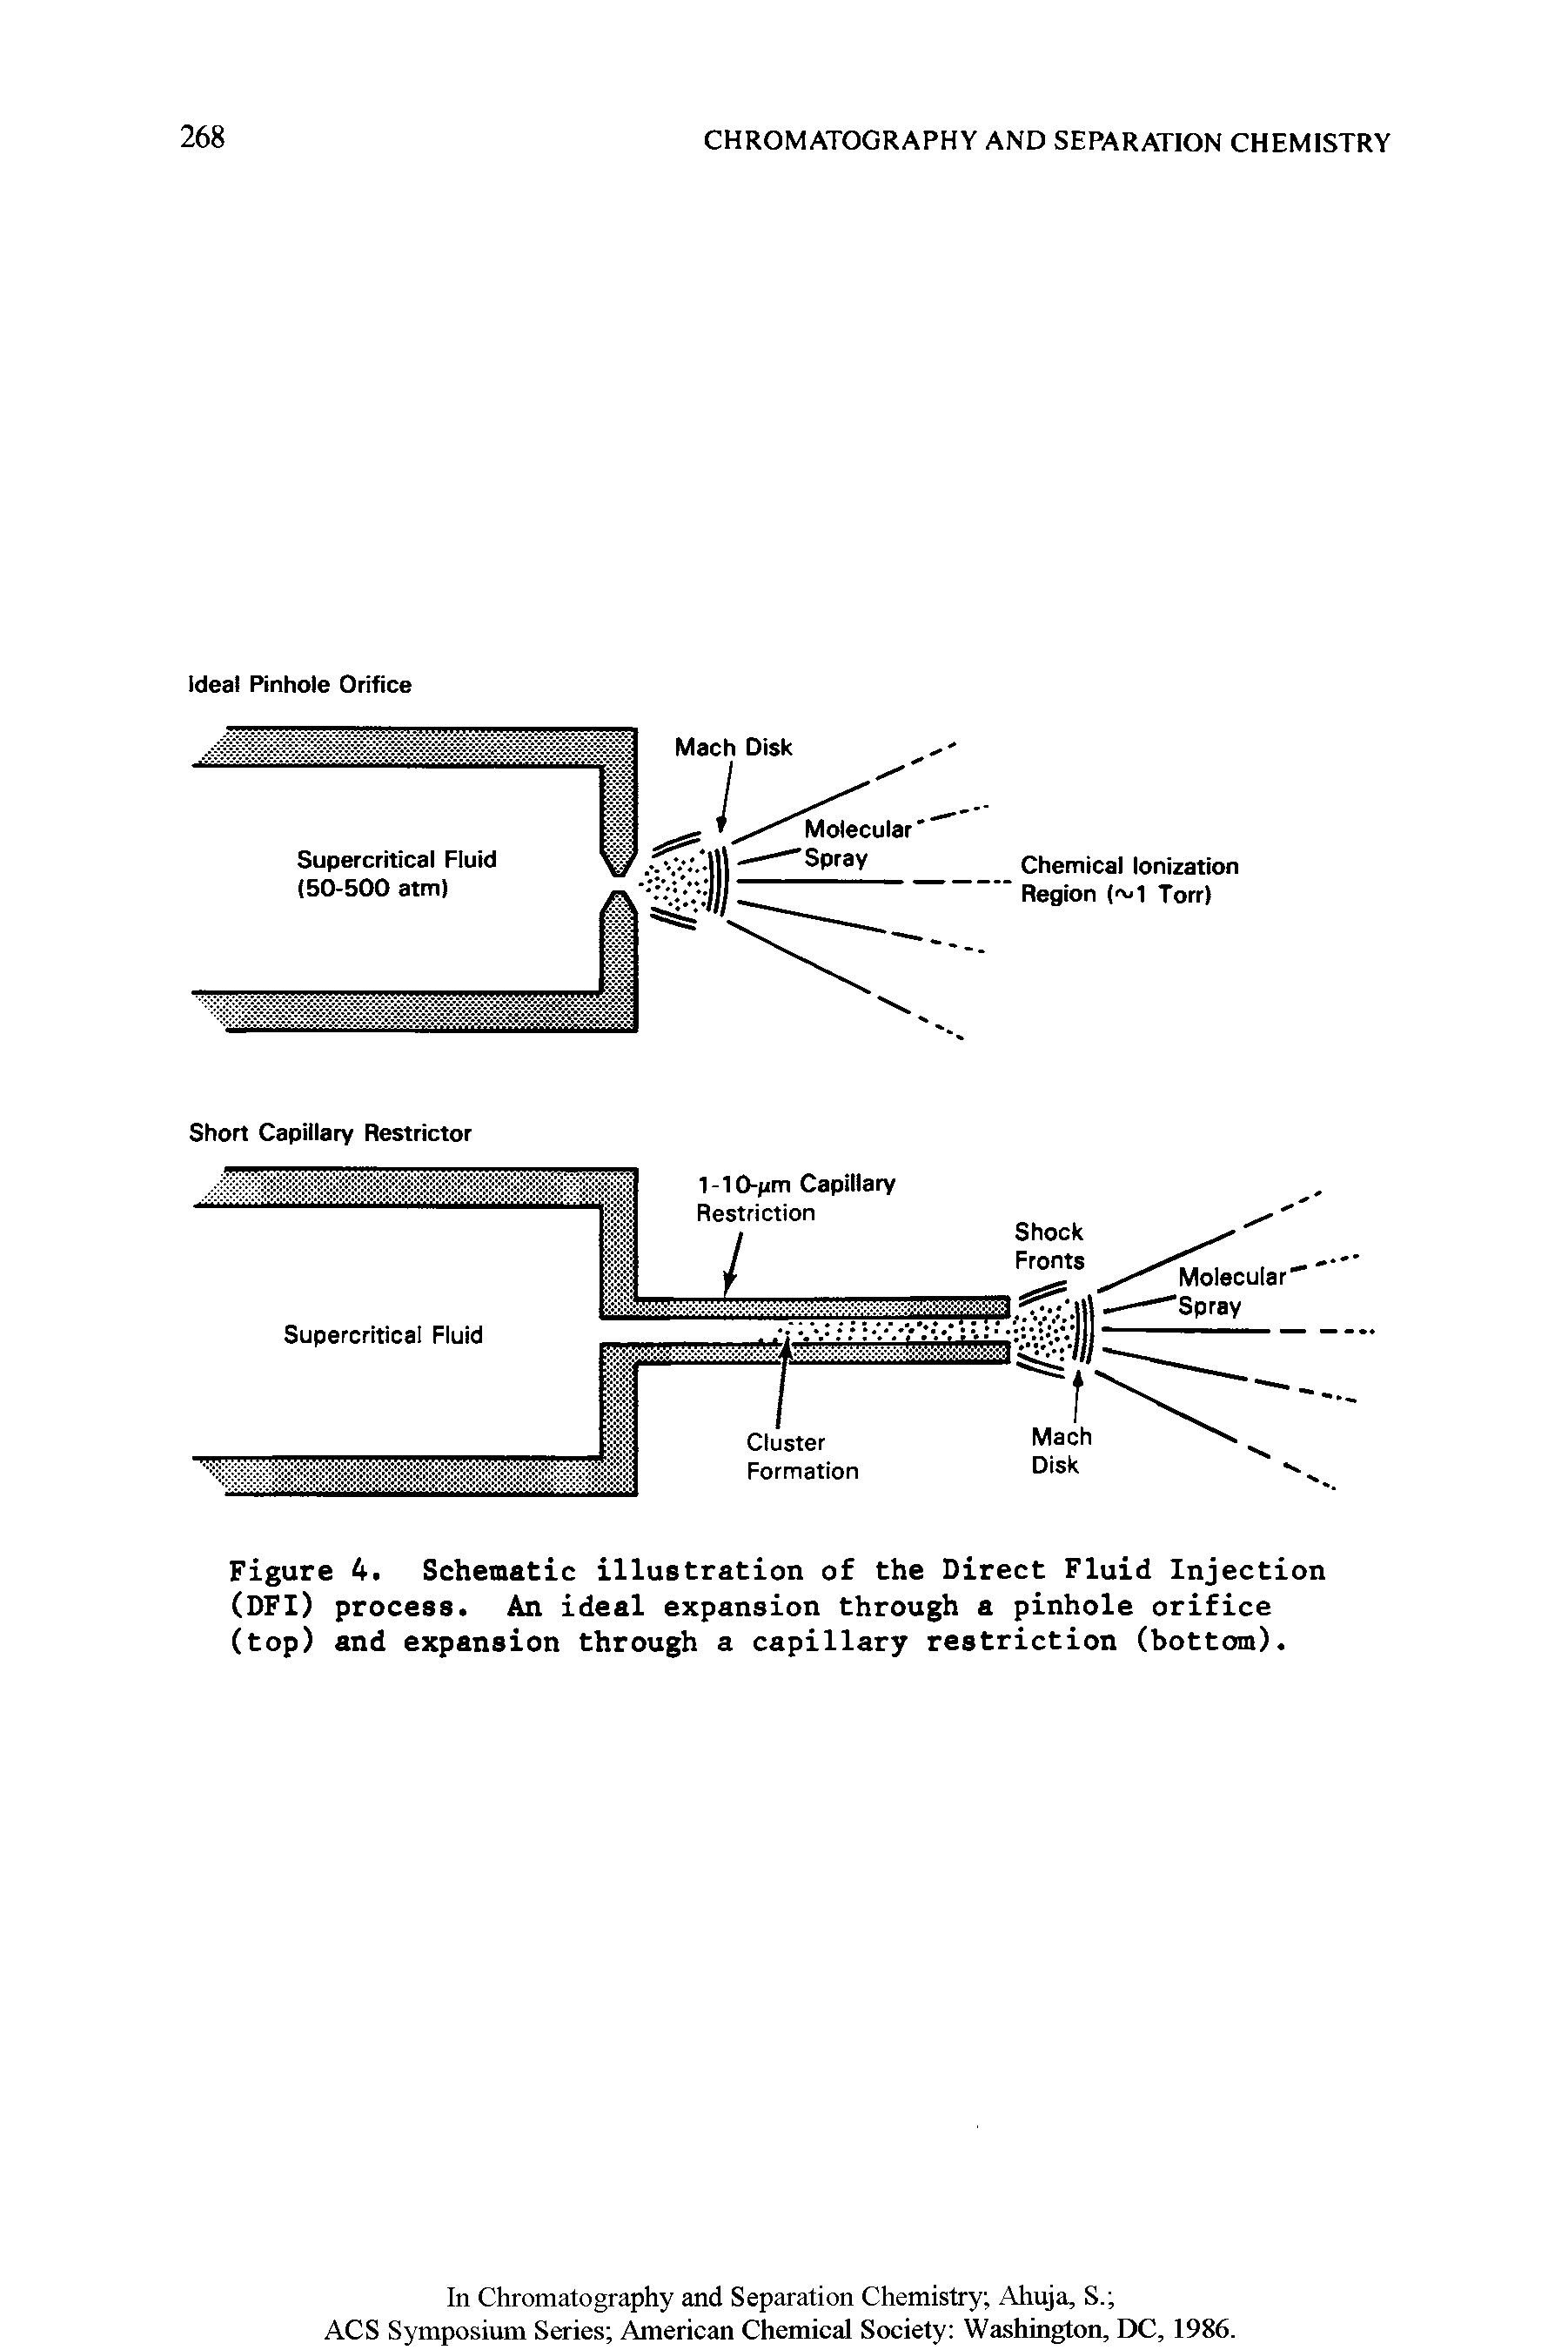 Figure 4i Schematic illustration of the Direct Fluid Injection (DFI) process. An ideal expansion through a pinhole orifice (top) and expansion through a capillary restriction (bottom).